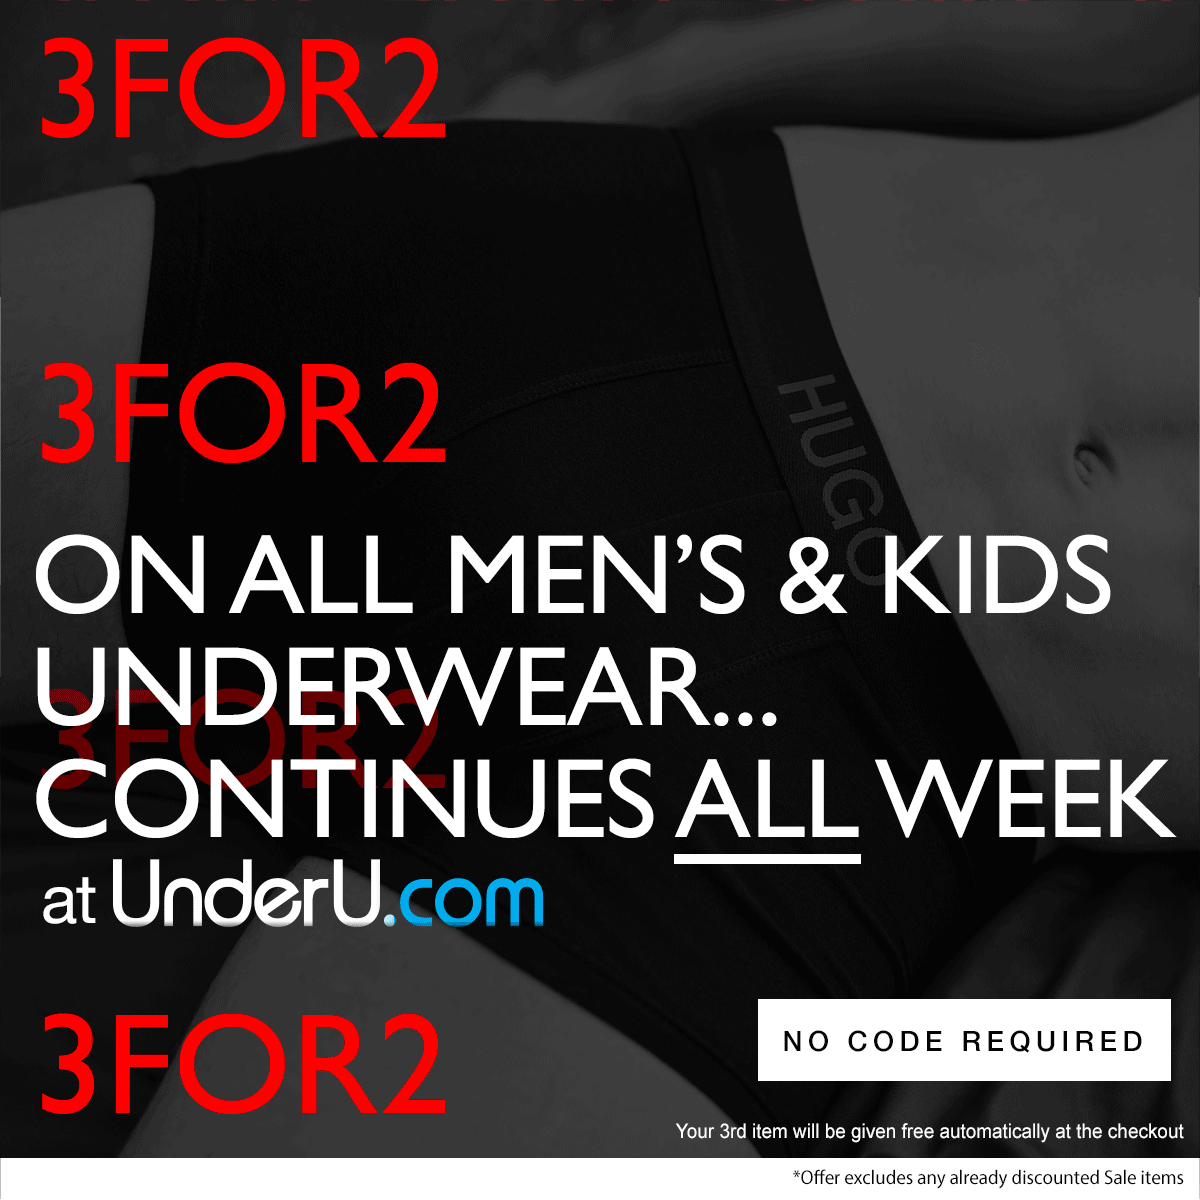 3 for 2 on all Underwear